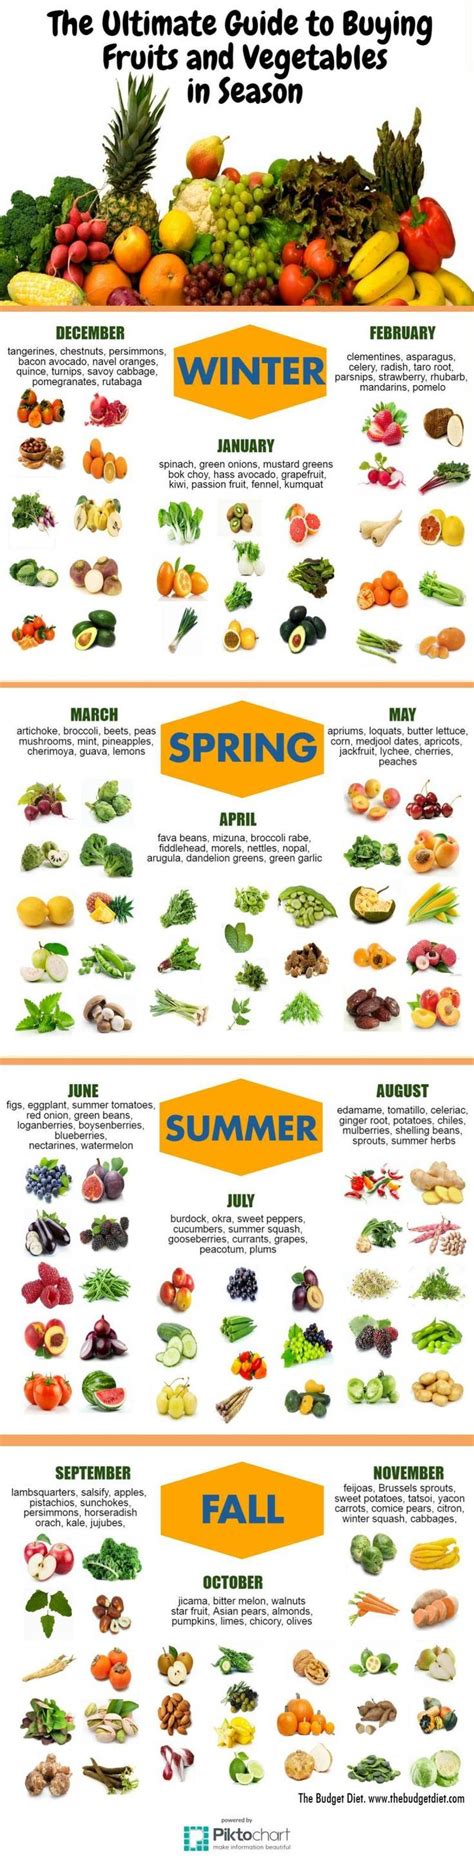 The Ultimate Guide To Buying Fruits And Vegetables In Season